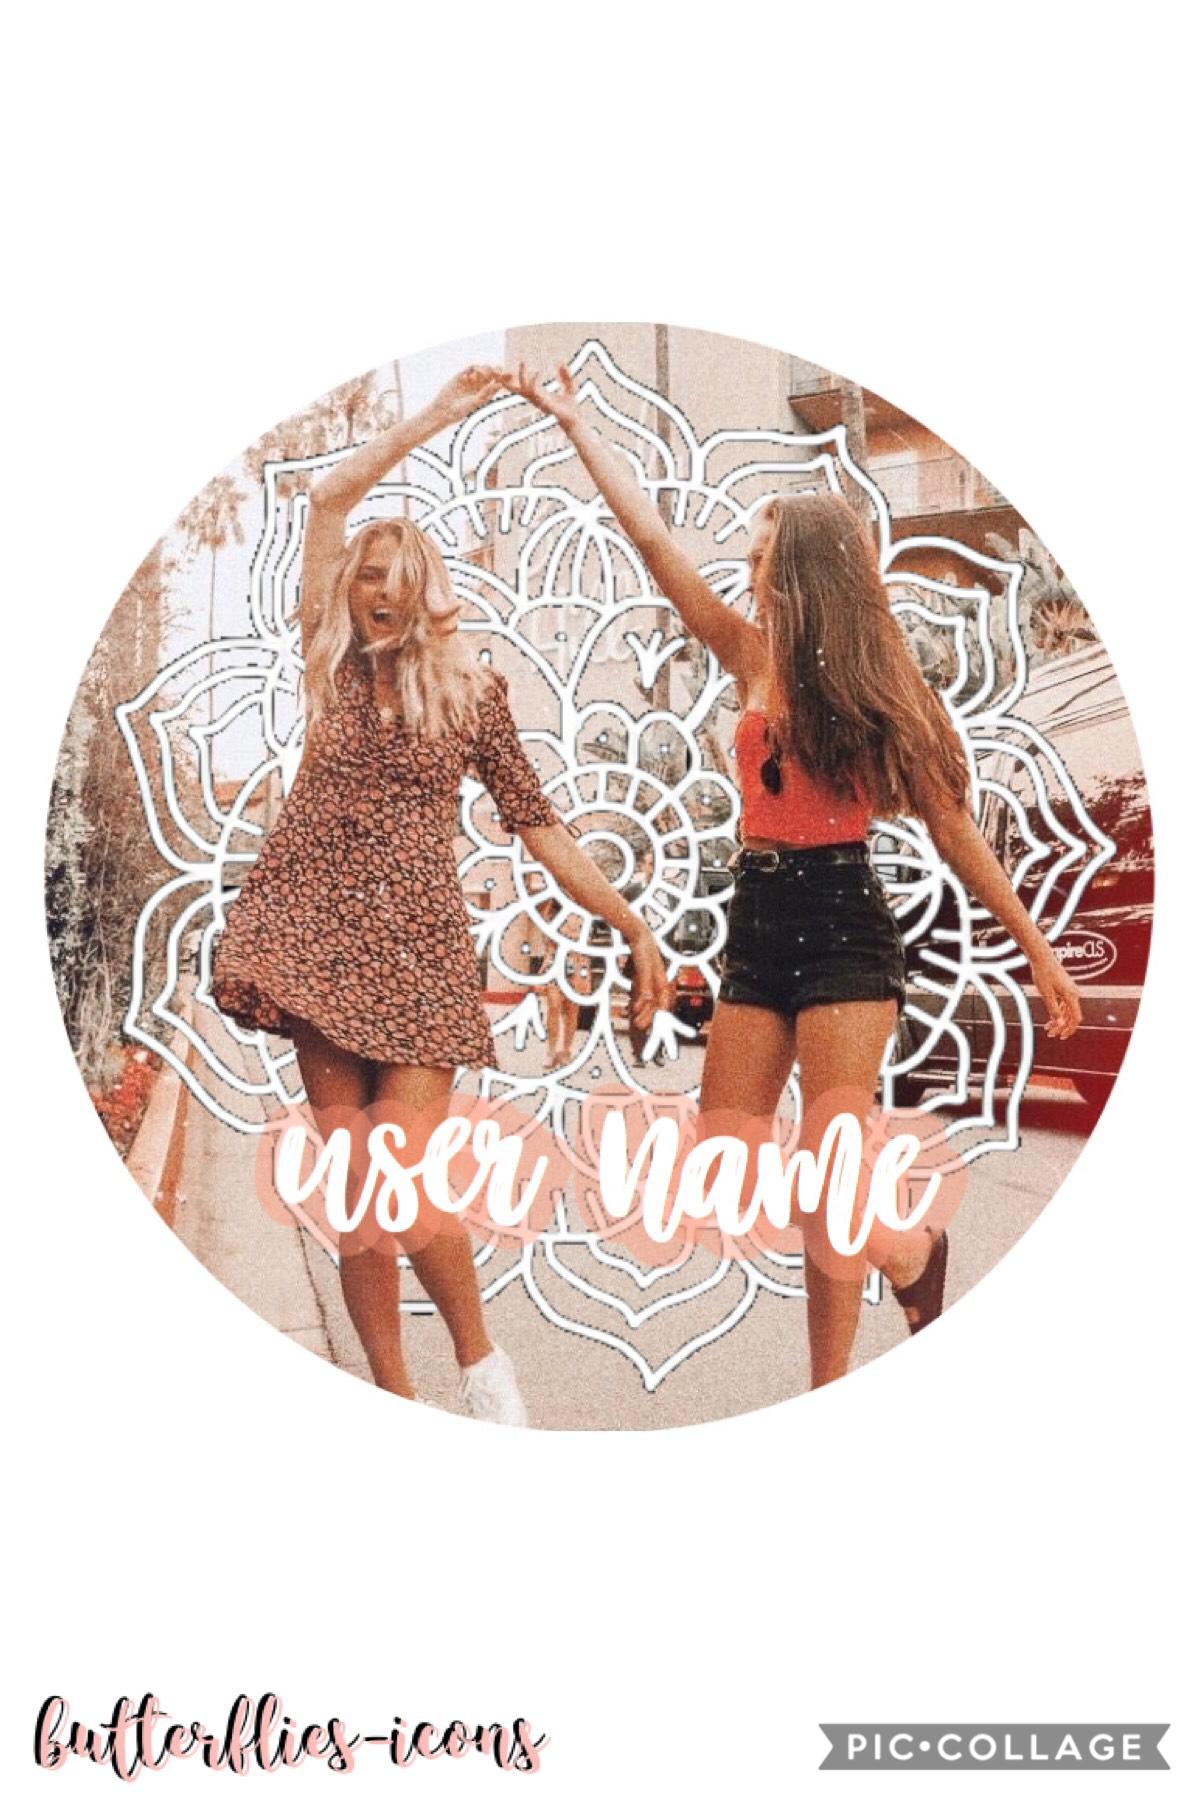 tap

🦋 hello gorgeous people! if you guys like this icon and if you would like your username on it just ask and i’d be more than happy to put it in there 🦋